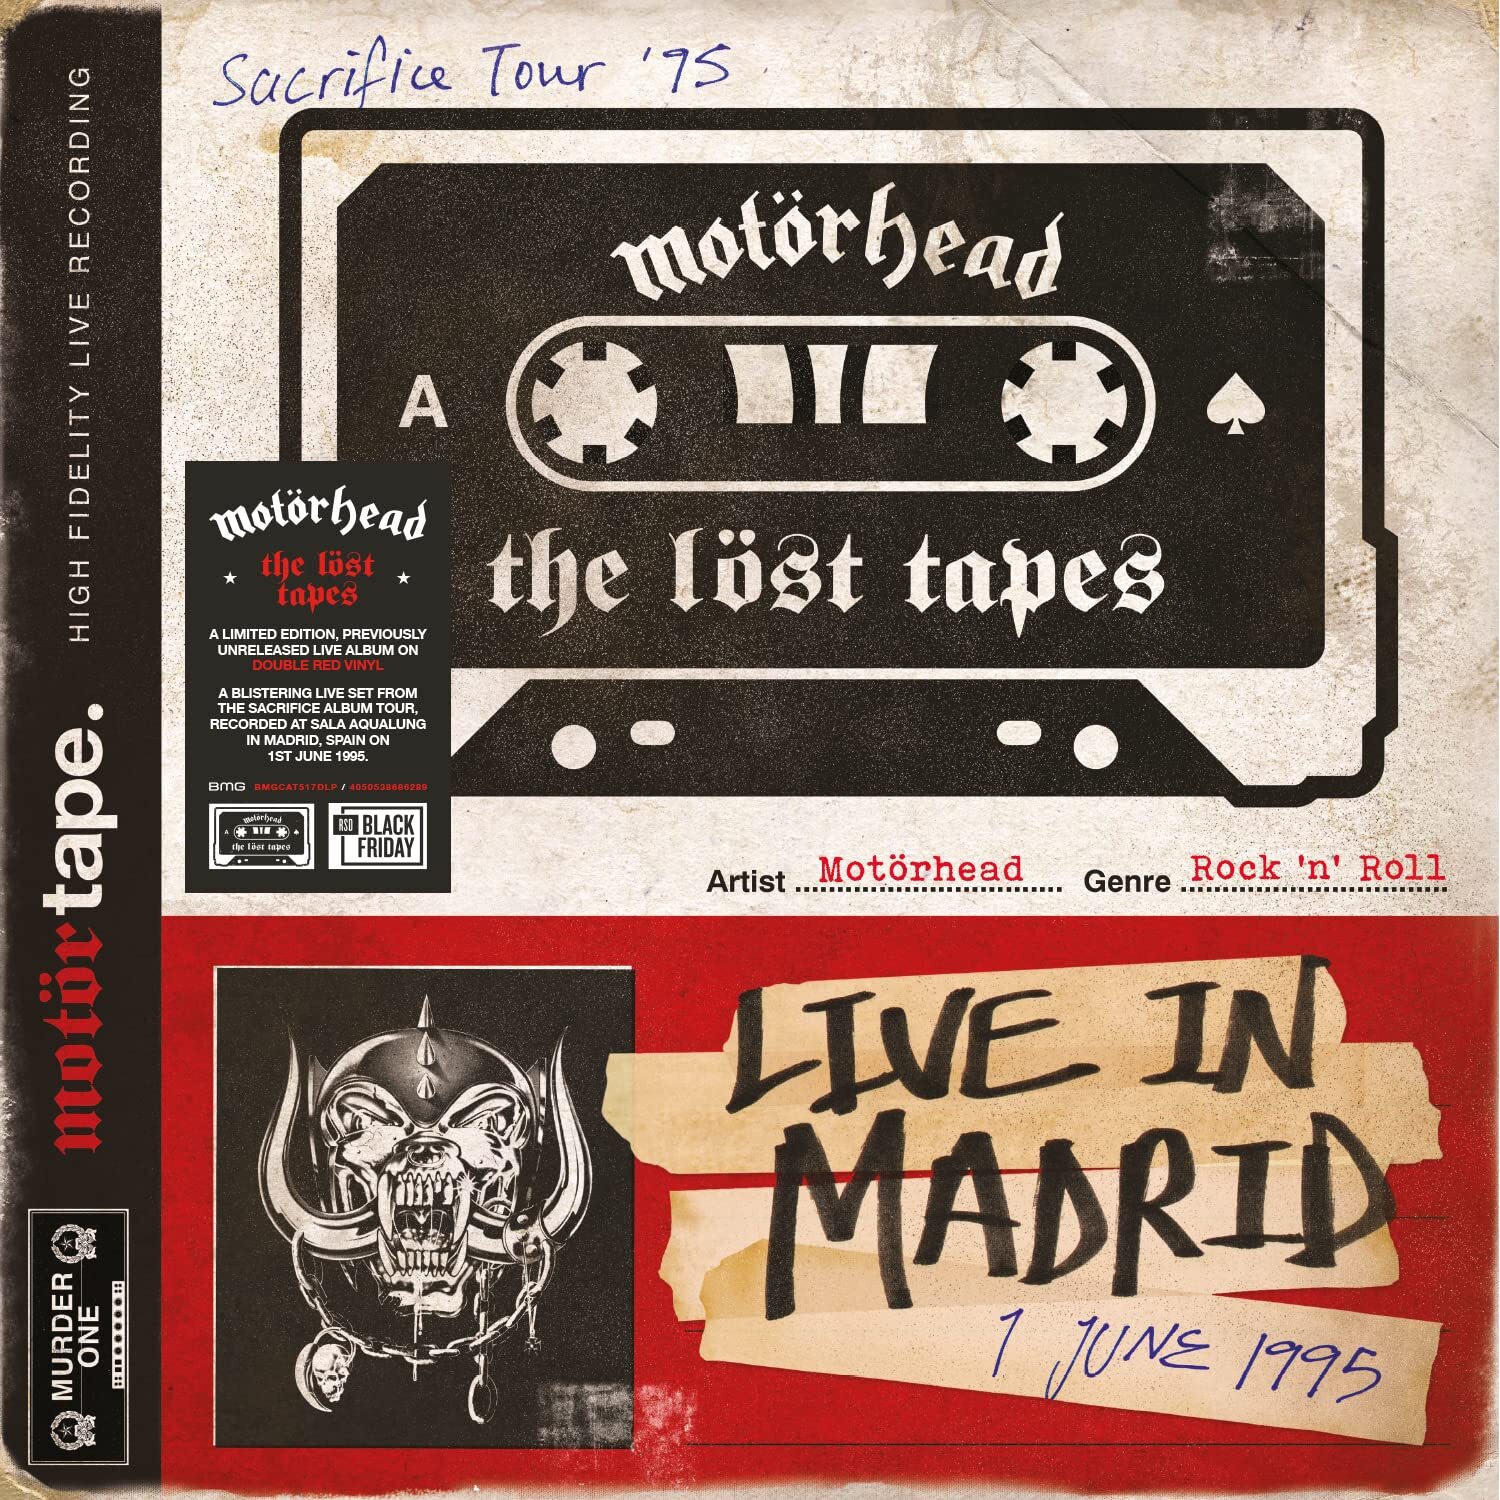 Рок Warner Music Motorhead - The Lost Tapes Vol. 1 Live In Madrid 1 June 1995 (Limited Edition Coloured Vinyl 2LP) рок sony dream theater lost not forgotten archives master of puppets – live in barcelona 2002 limited gold vinyl